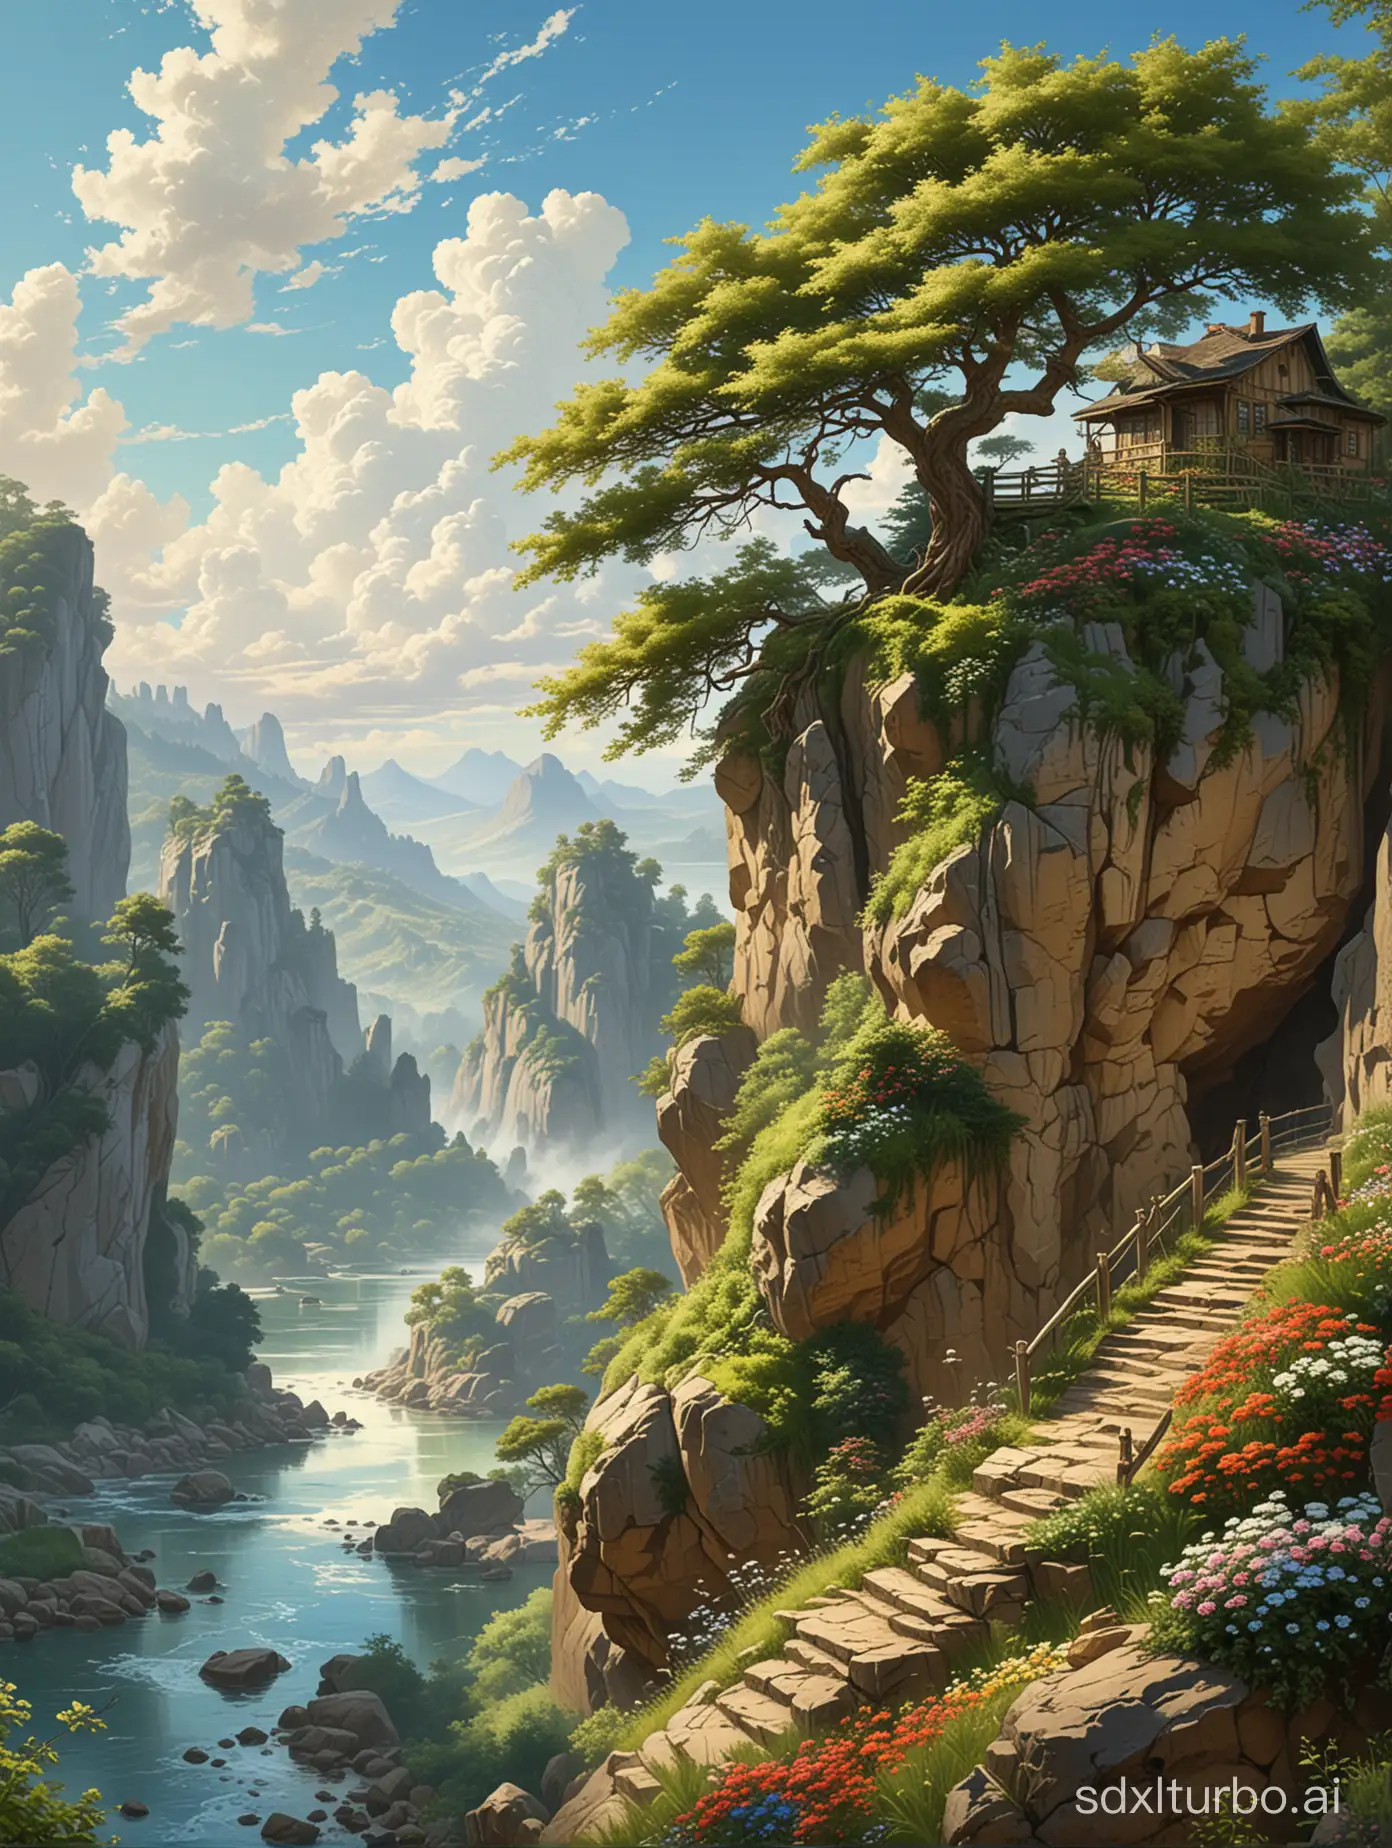 create a stunning ultrarealistic painting in the style of Carl Spitzweg, depicting a single high cliff with a volkswagen in the edge. Atop the rock, a majestic bonsai tree with intricate branches and foliage stands tall. A serene river flows gently beneath the rock, with wooden stairs leading to a tranquil pathway. The scene is adorned with an array of vibrant flowers, lush green grass, and a anime style of blue sky dotted with fluffy white clouds. The high angle view captures the beauty and grandeur of this idyllic landscape.